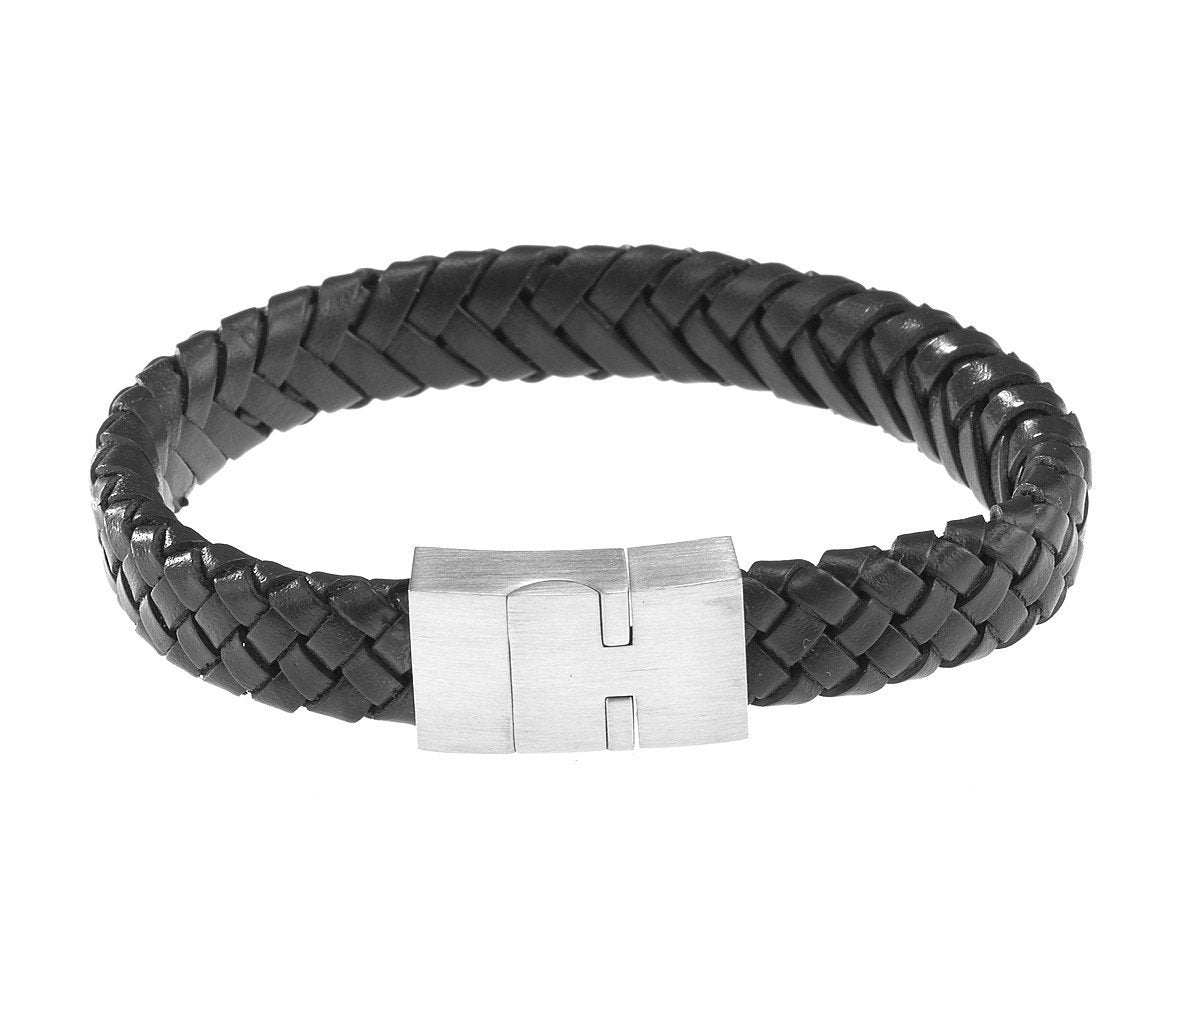 BEON.COM.AU Mens Leather bracelet featuring: - Black Leather Woven Leather - Stainless Steel Magnetic Clasp - 22 cm length, 11 mm wide, 2.3 mm wide clasp - Comes in Official Cudworth Gift Pouch. Bracelets Cudworth at BEON.COM.AU